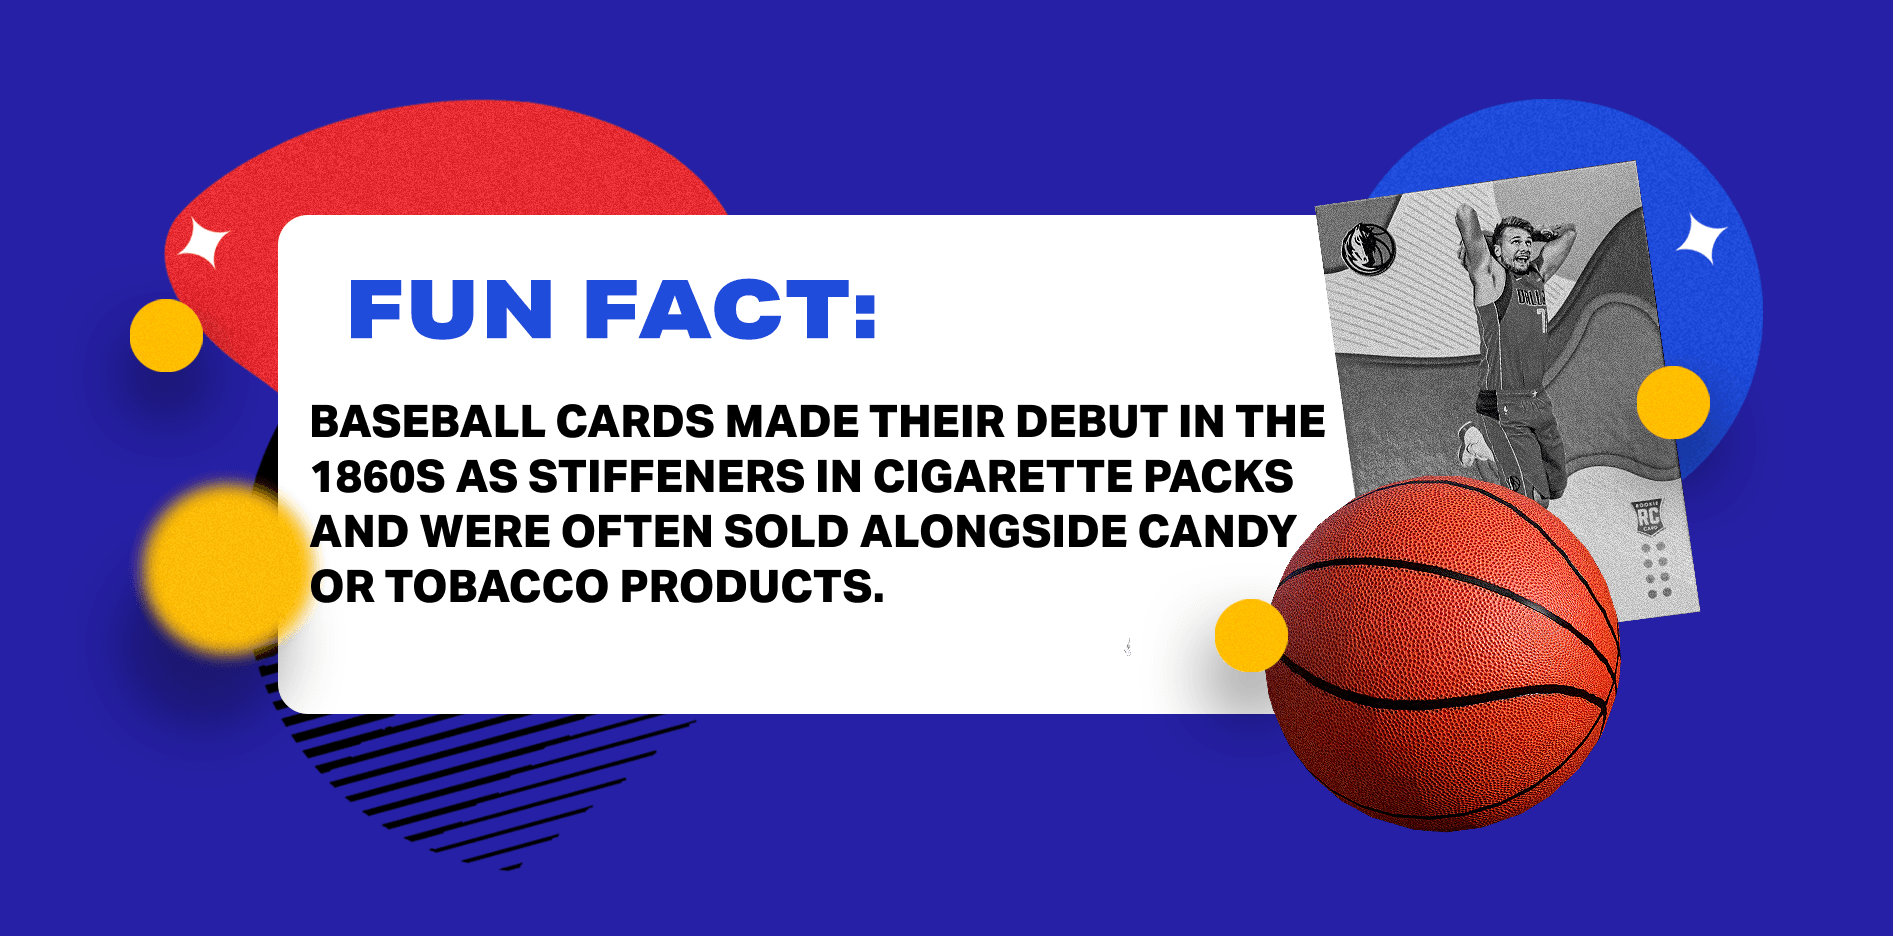 6 Best Sports Card Brands: Which Brand Is Worth The Most?